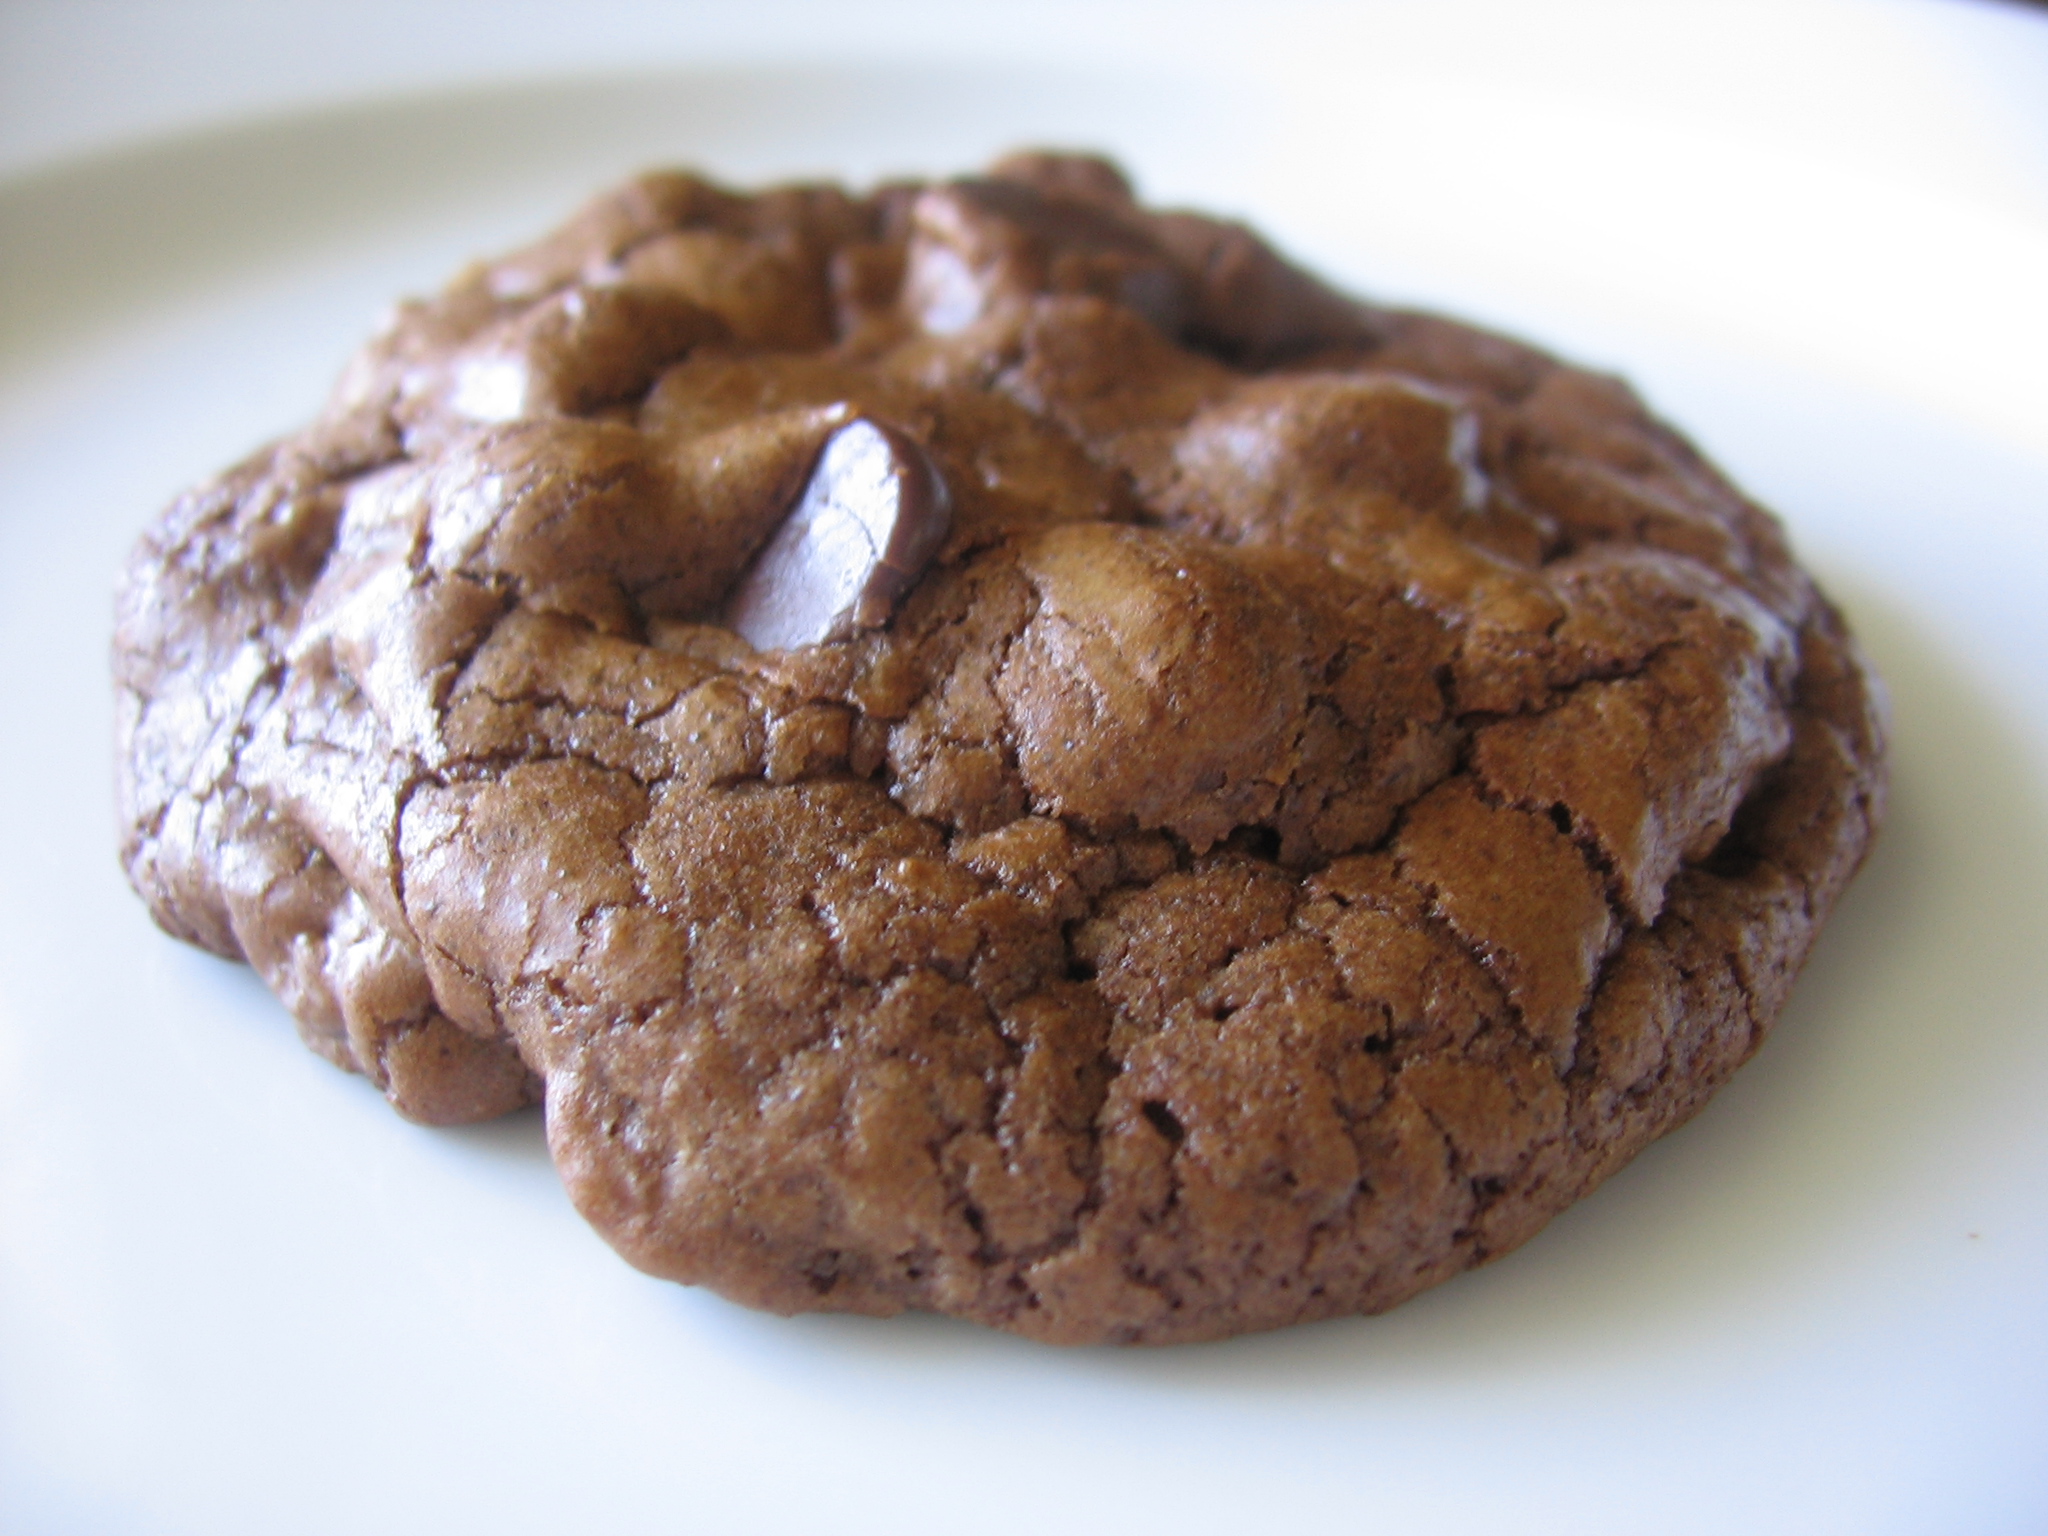 I am a firm believer that in order to have a trully 'Chocolate' cookie it should include melted chocolate in the dough and not just cocoa powder (a ...